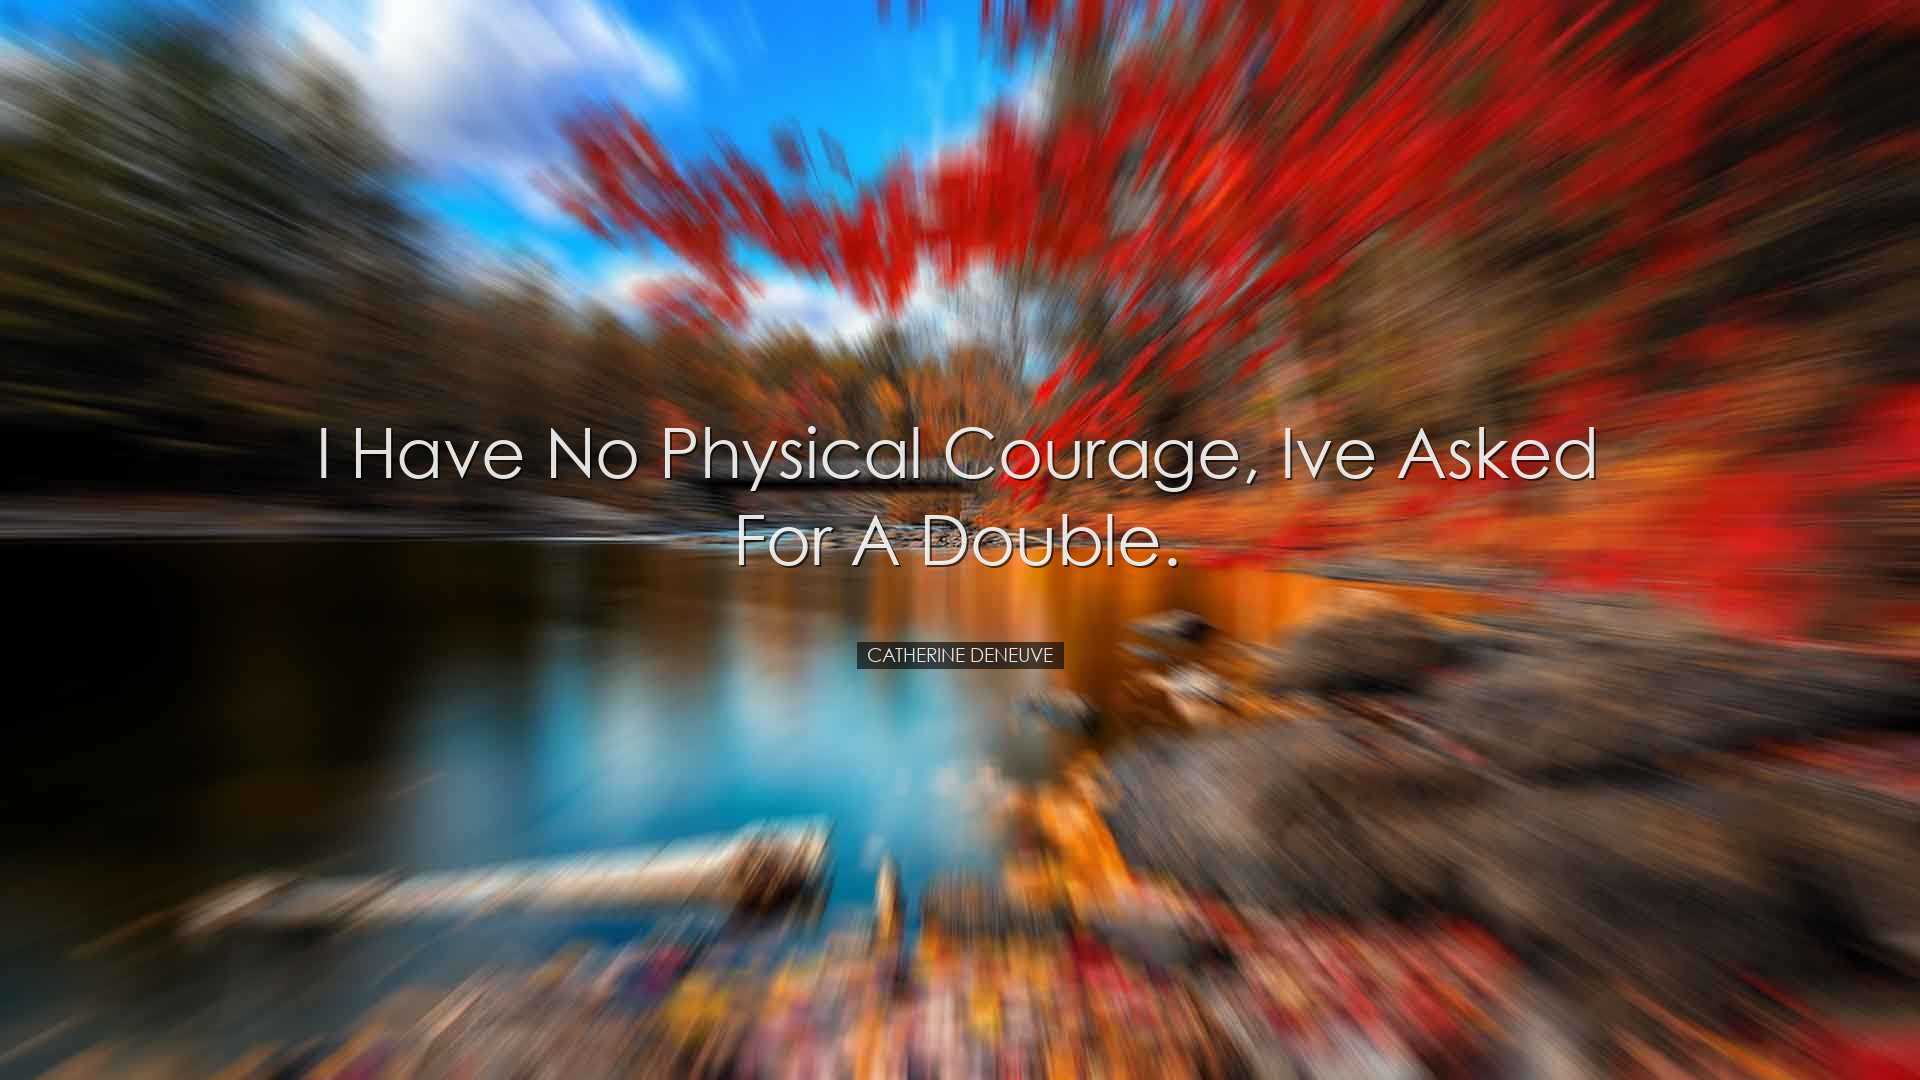 I have no physical courage, Ive asked for a double. - Catherine De